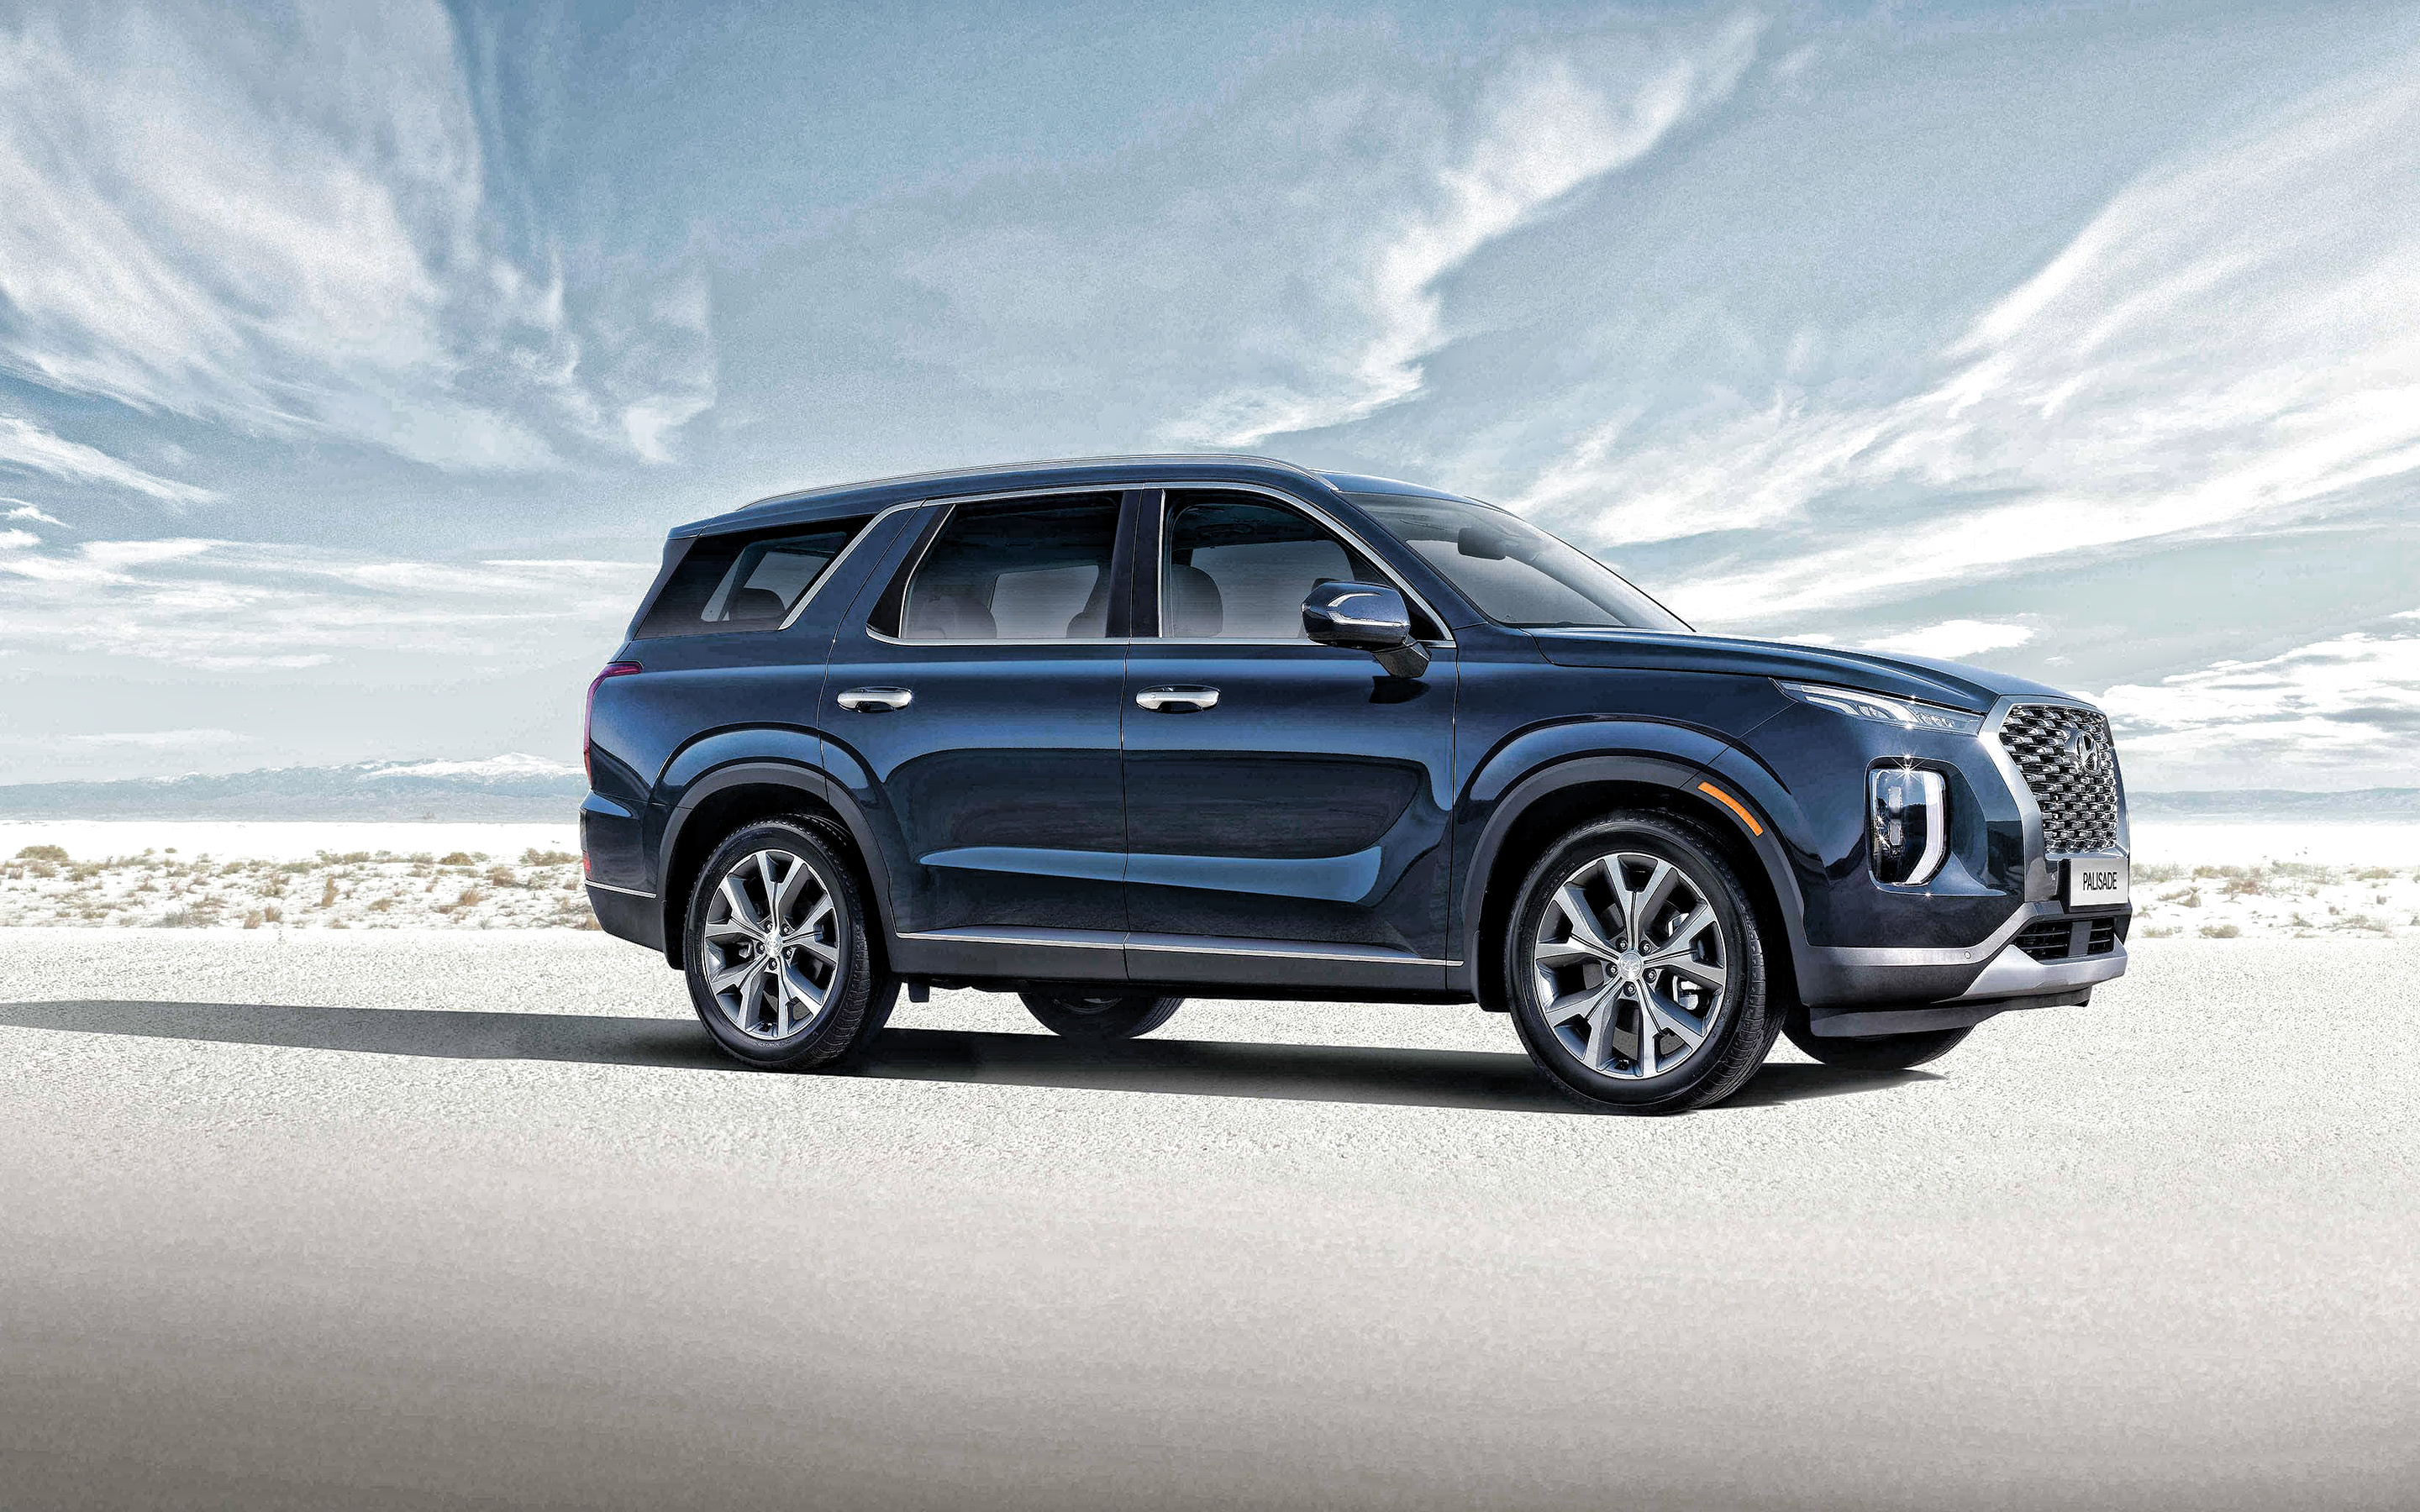 Hyundai Palisade, Luxury SUV, New blue model, High quality pictures, 2880x1800 HD Desktop